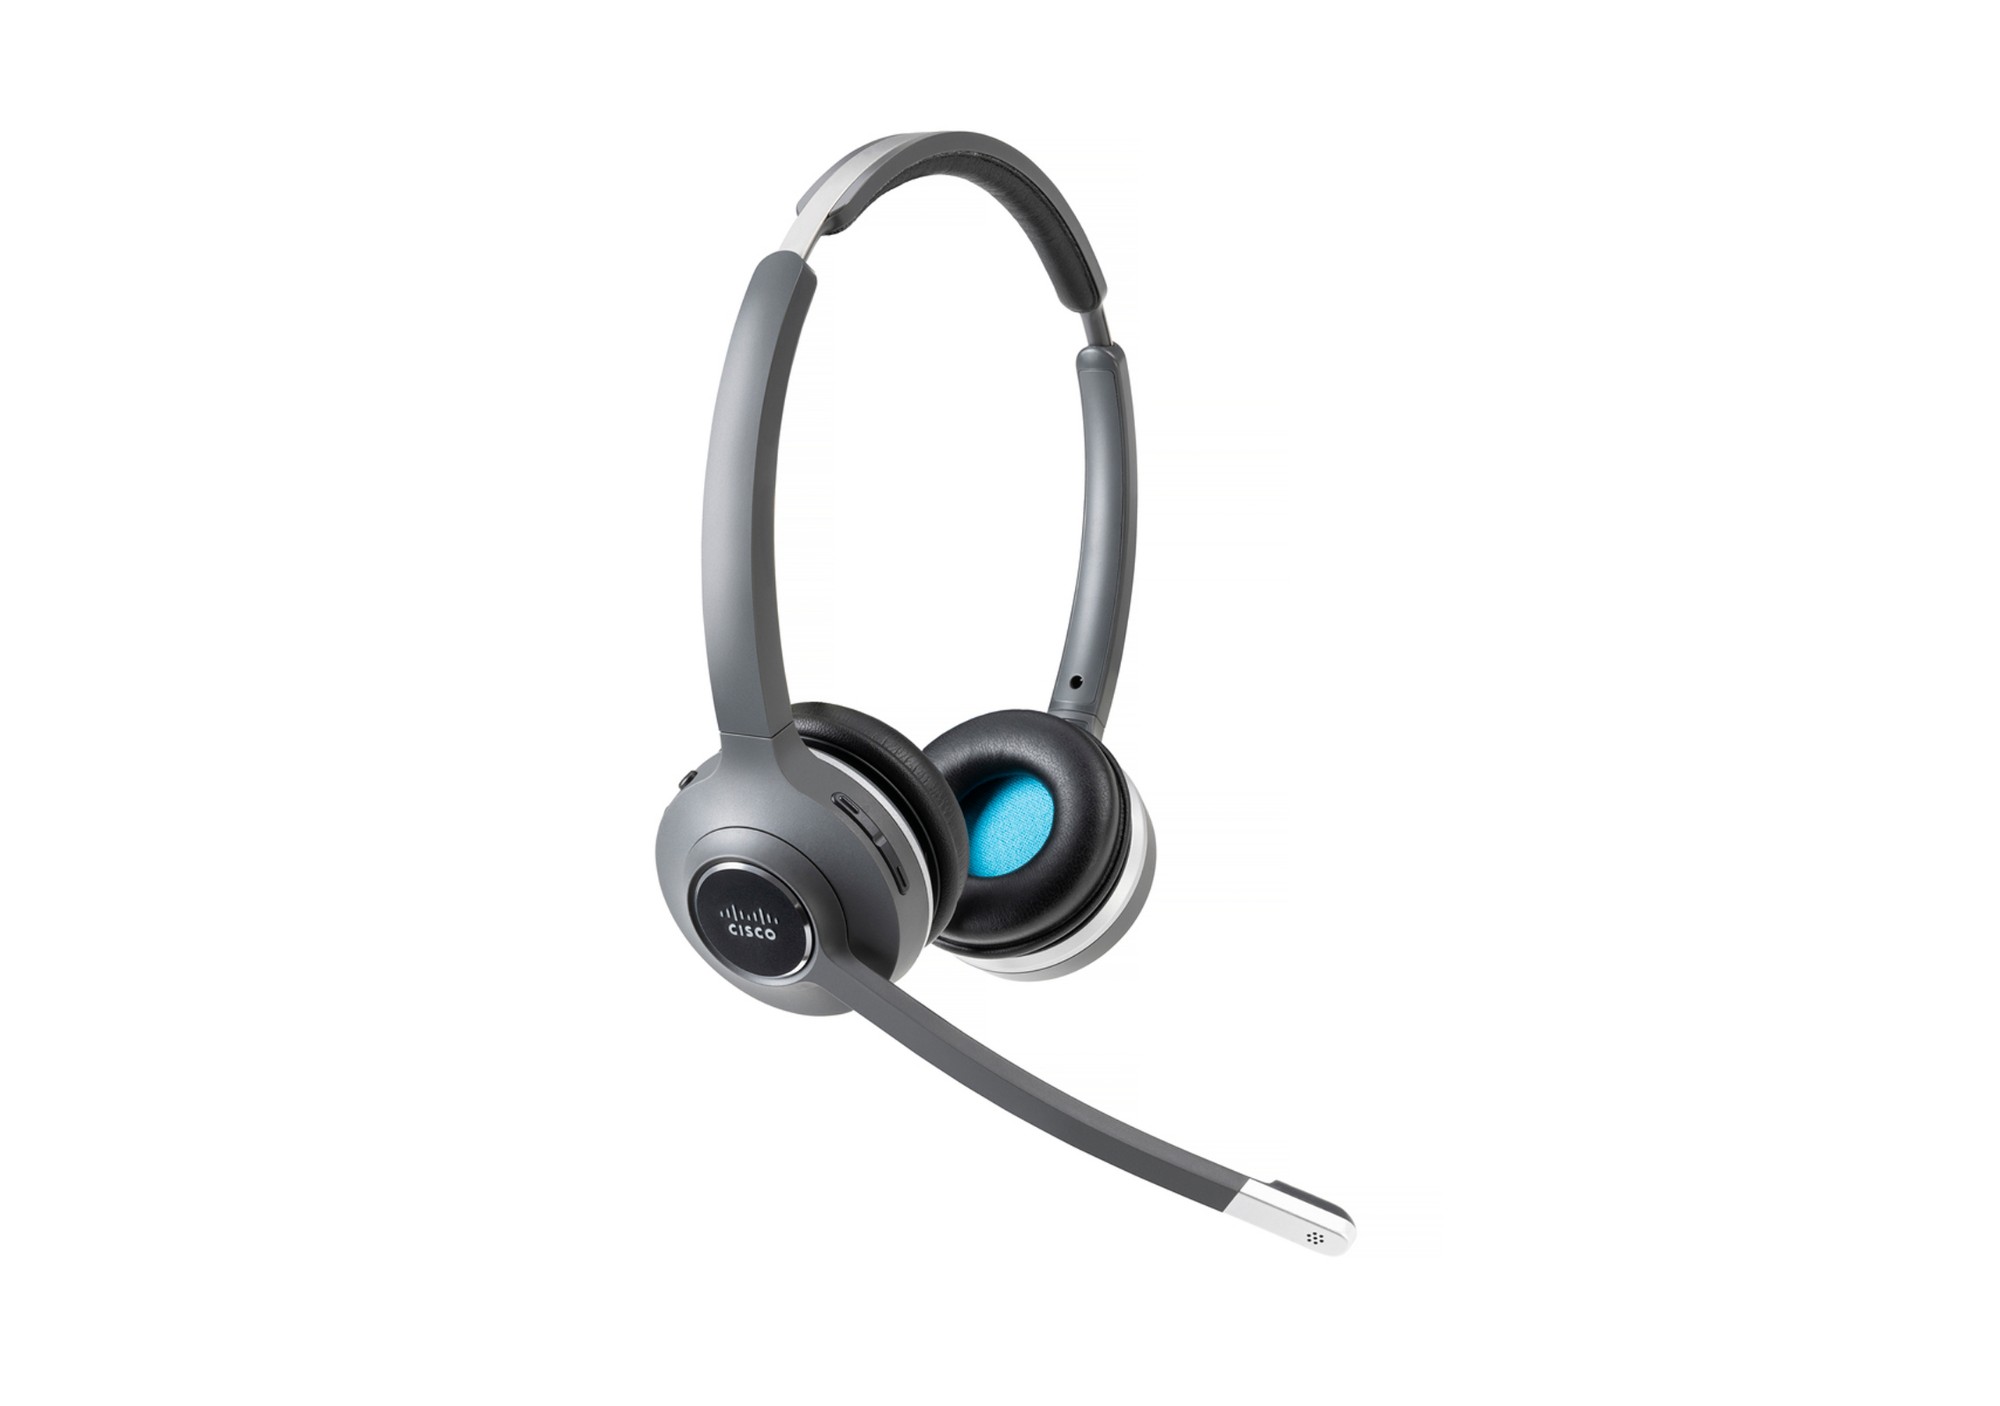 Photos - Headphones Cisco Headset 562, Wireless Dual On-Ear DECT Headset with Standard Bas CP 